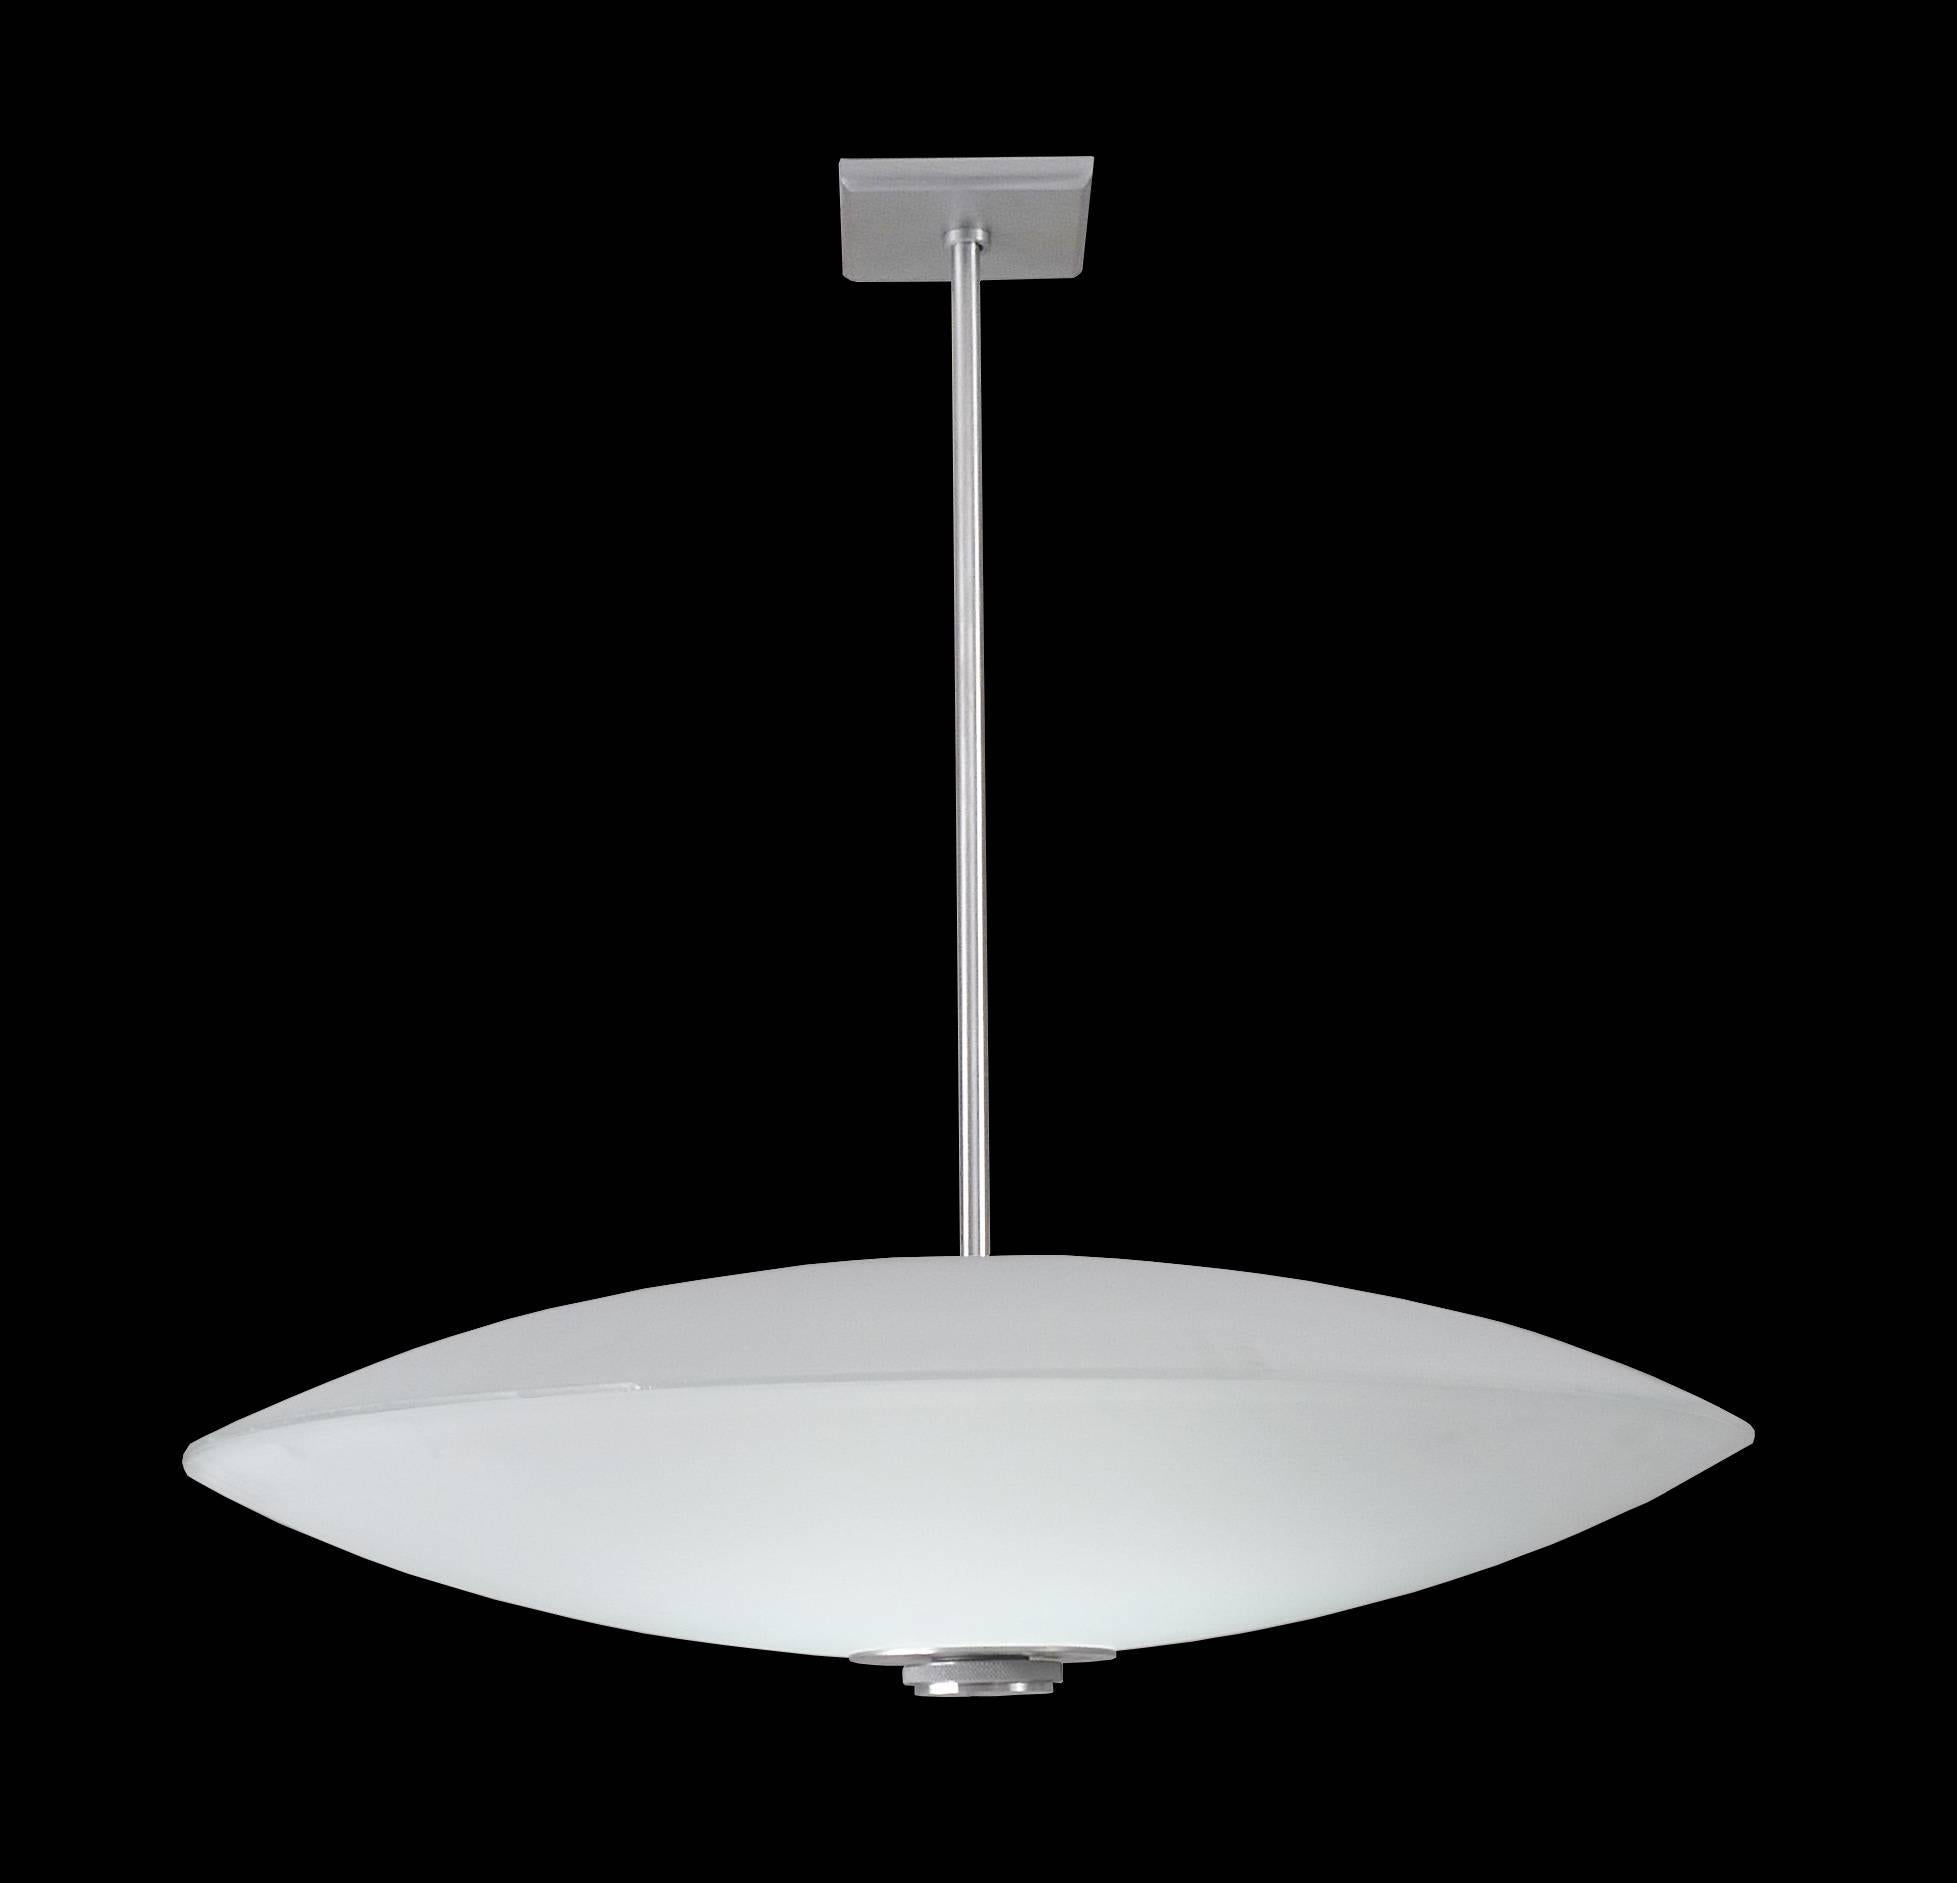 32 inch diameter spaceship pendant with white glass bowls top and bottom. Metalwork is brushed aluminum, bottom finial has knurled detail. LED lamping 3000k standard color temperature. 0-10 volt dimming.

Architect, Sandy Littman of Duesenberg